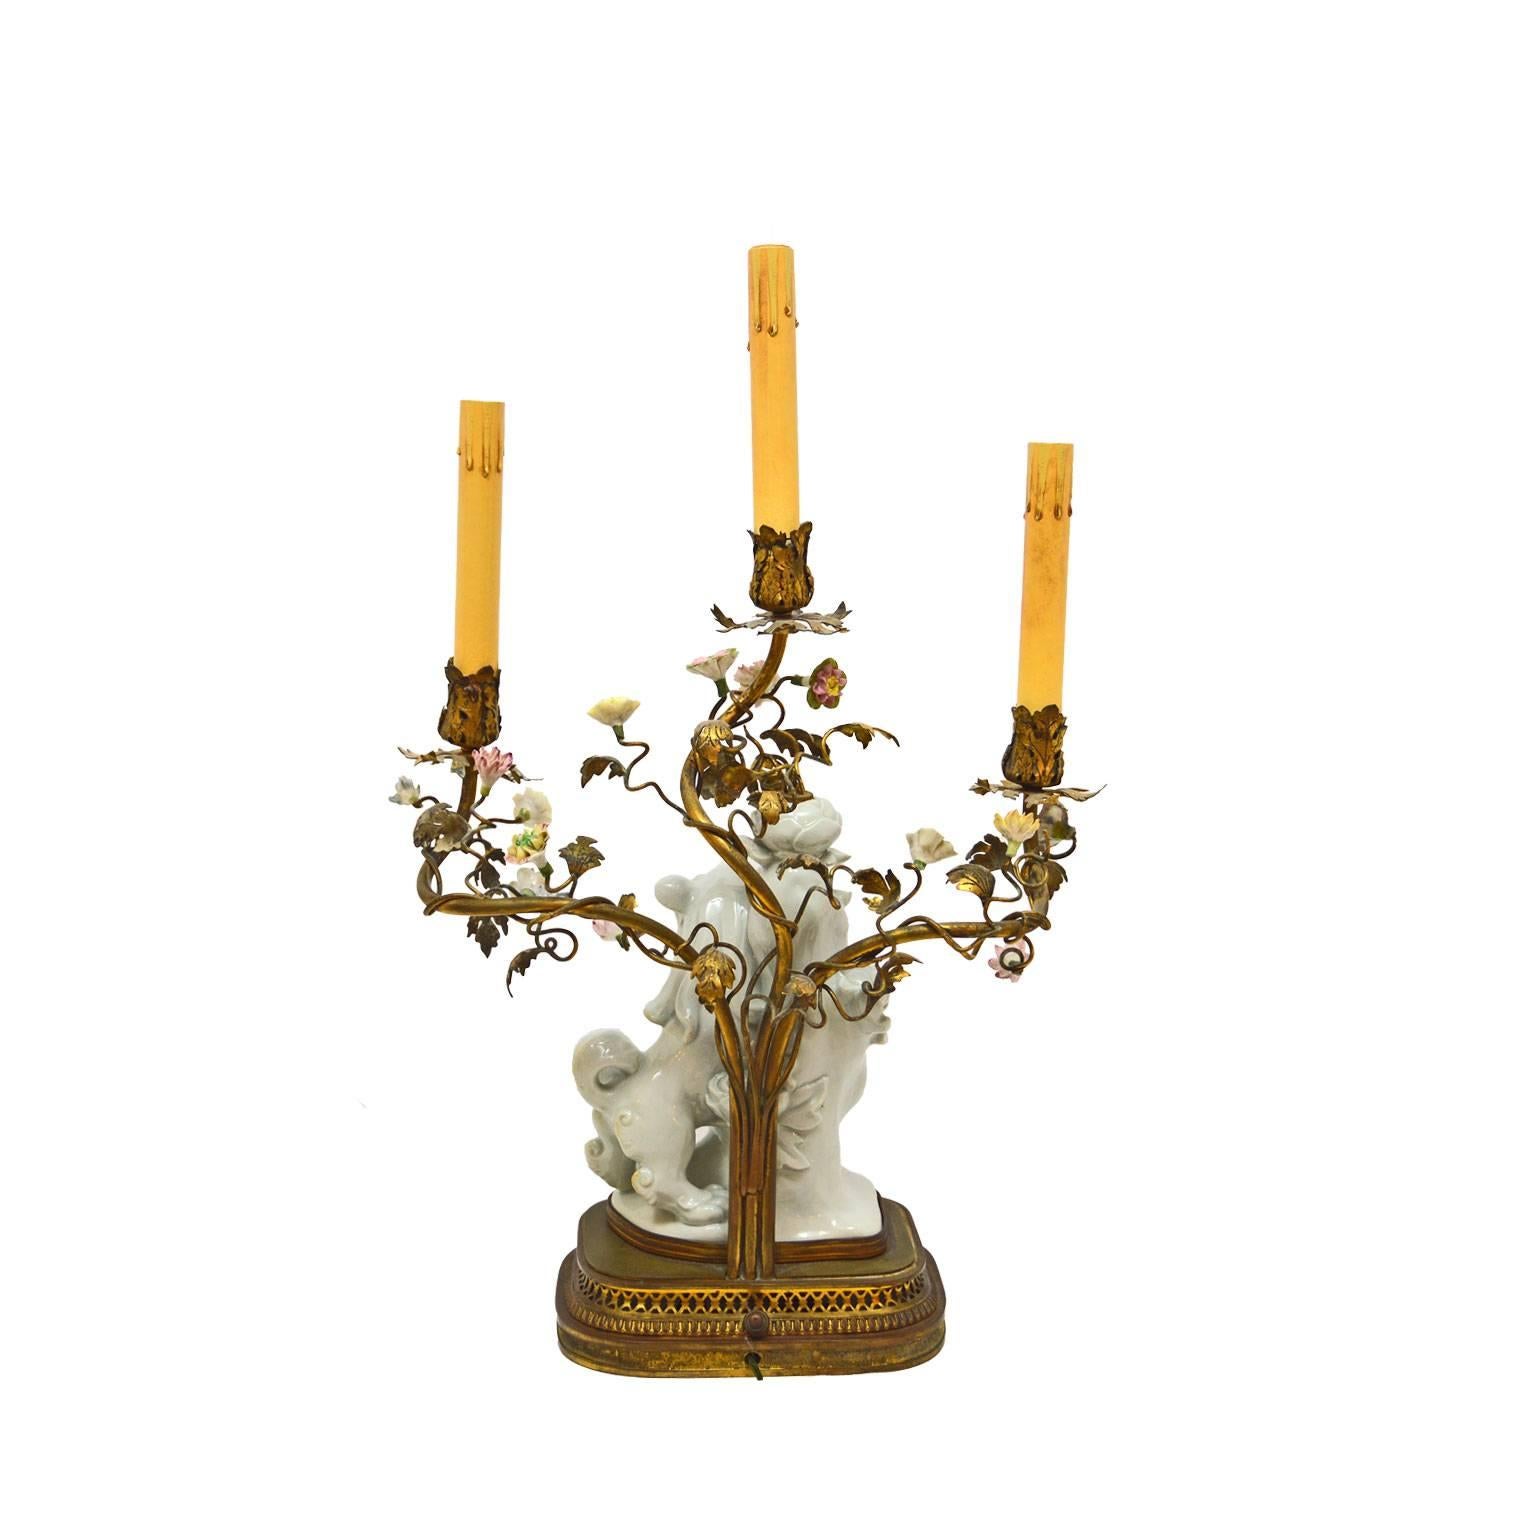 19th century porcelain foo dog candelabra featuring French porcelain flowers and imported Chinese foo dogs on a bronze base. The lamp has been electrified.